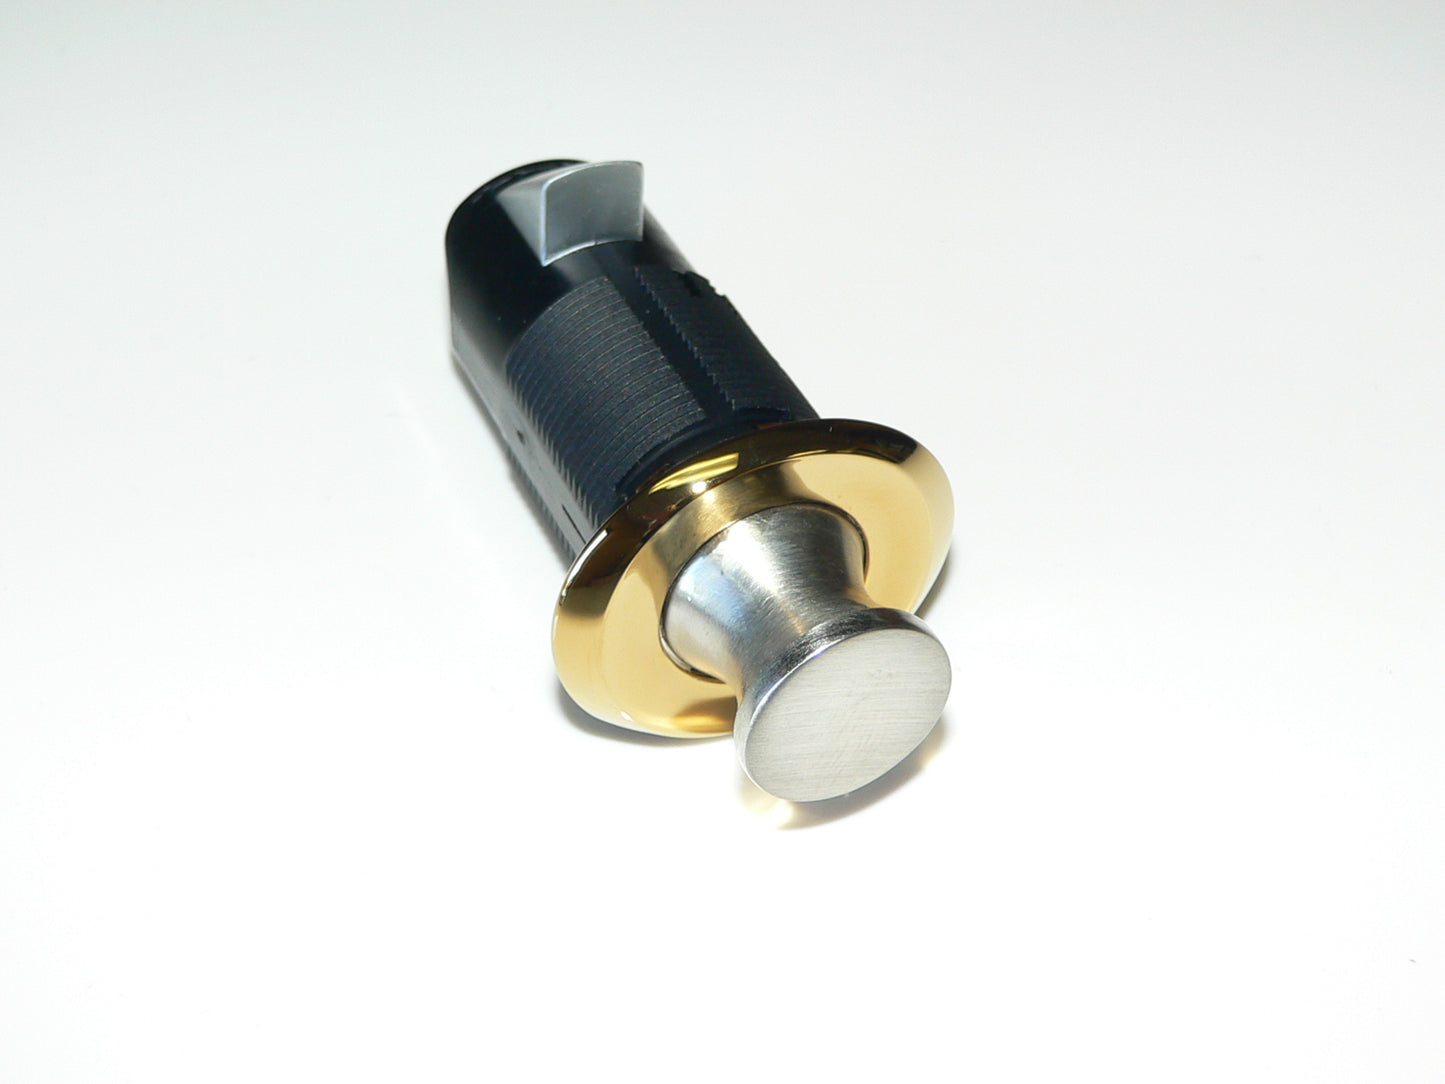 Southco Point Latch Push to Close Oval Perpendicuar Brass/Satin